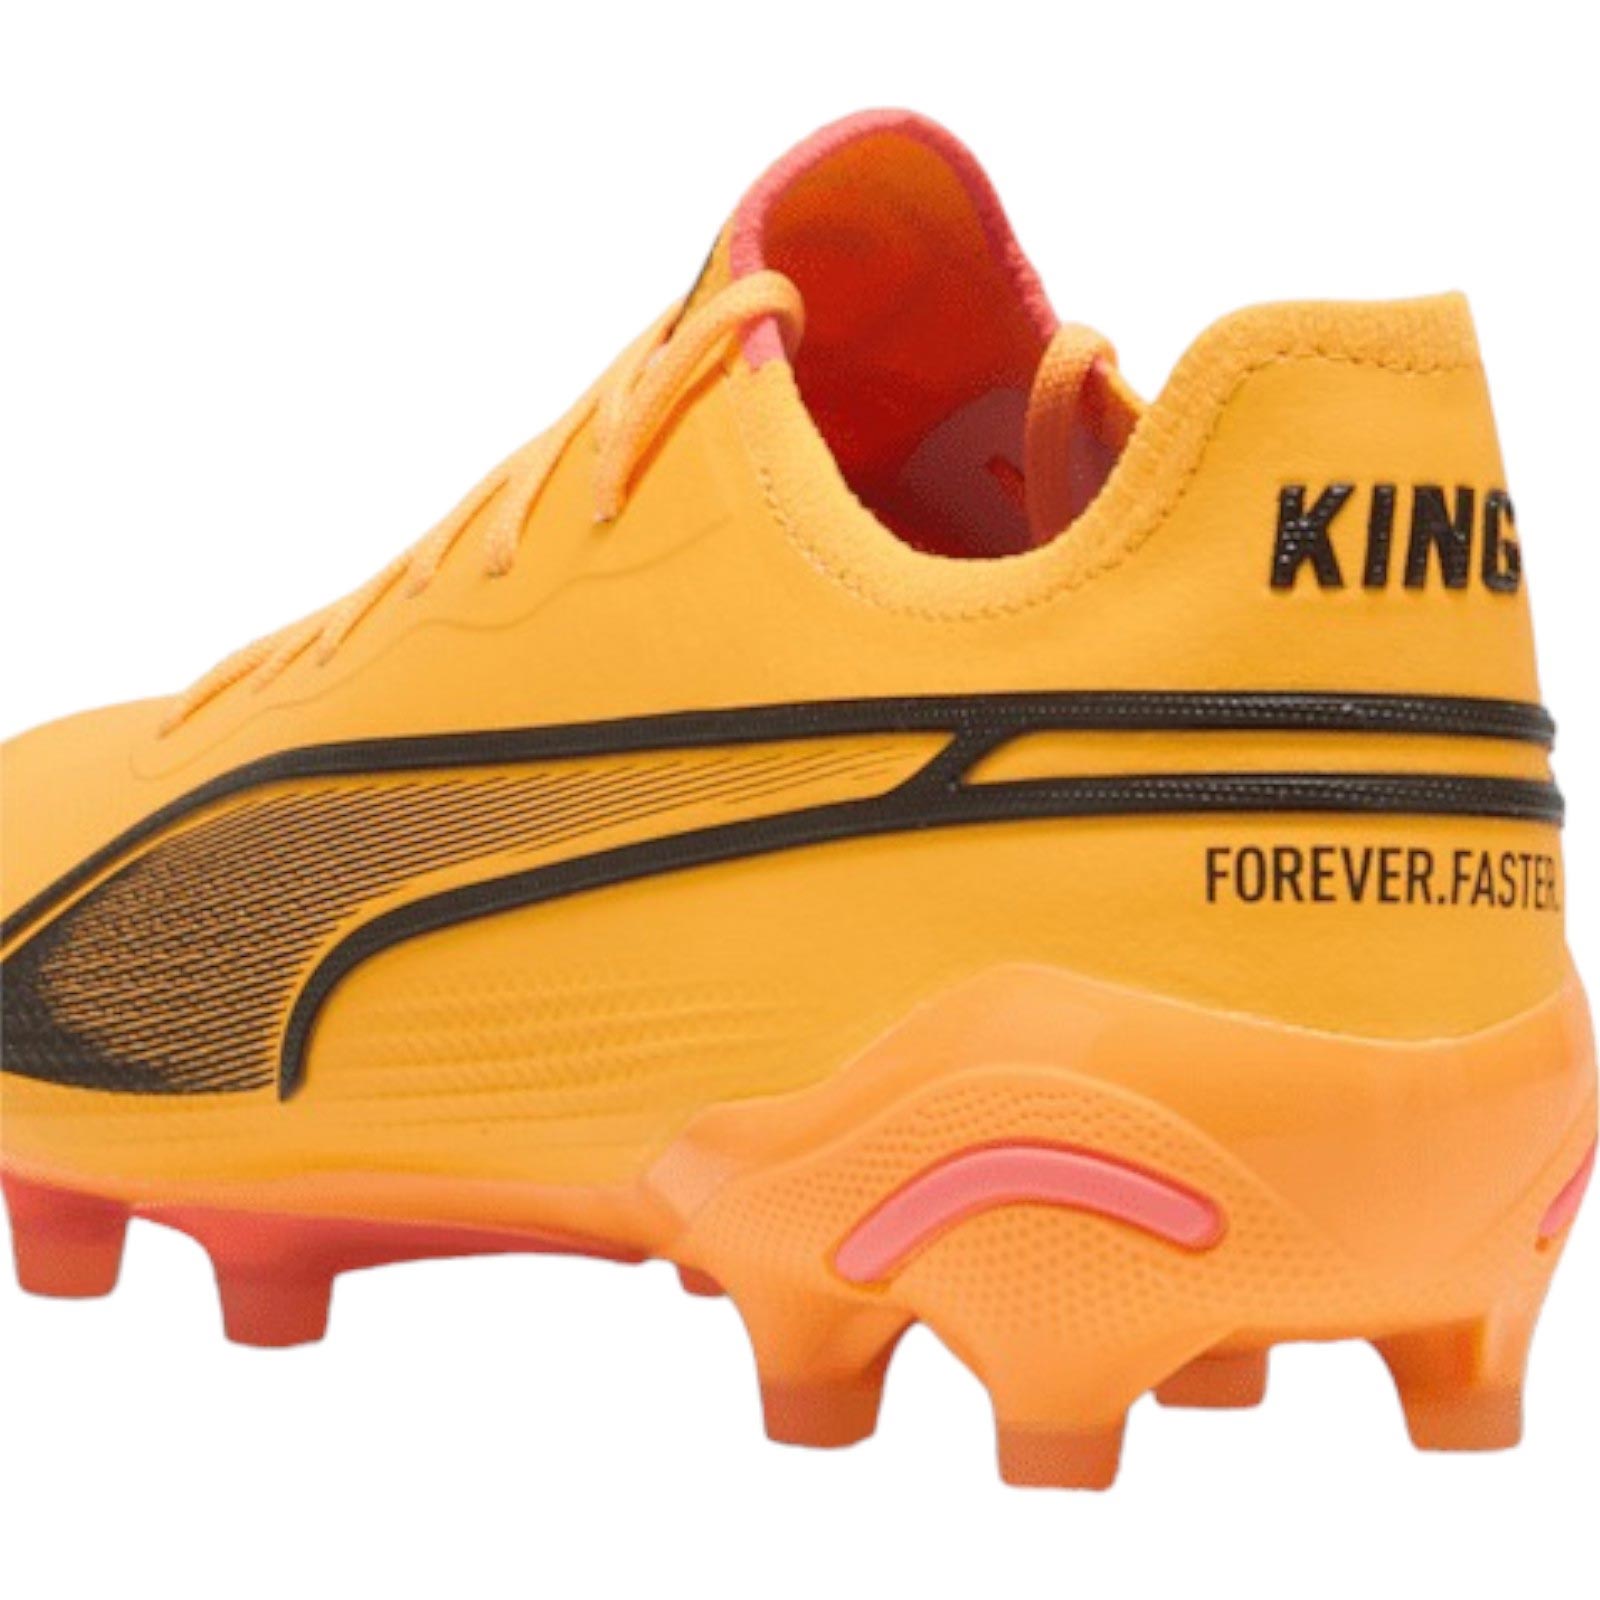 PUMA KING ULTIMATE MENS FIRM GROUND FOOTBALL BOOTS